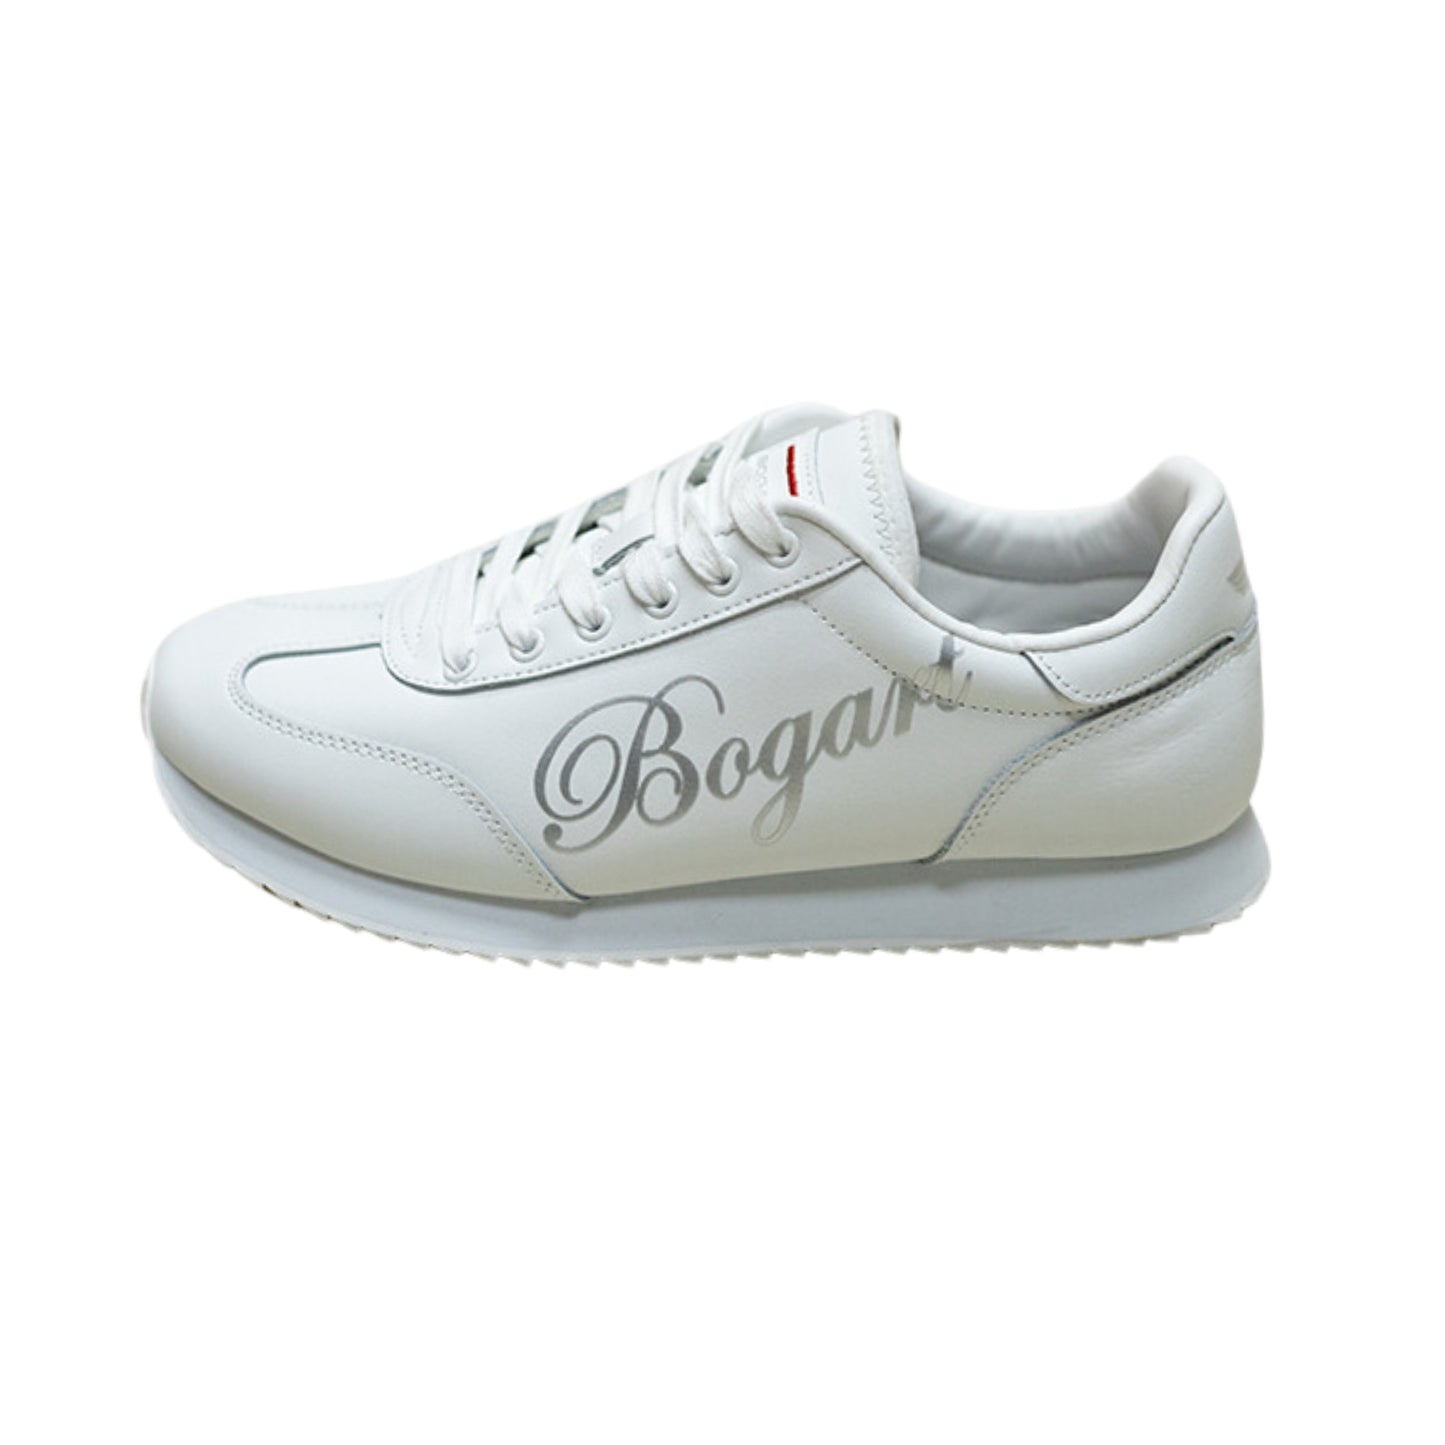 Bogart Black and White Collection Classic Sneaker